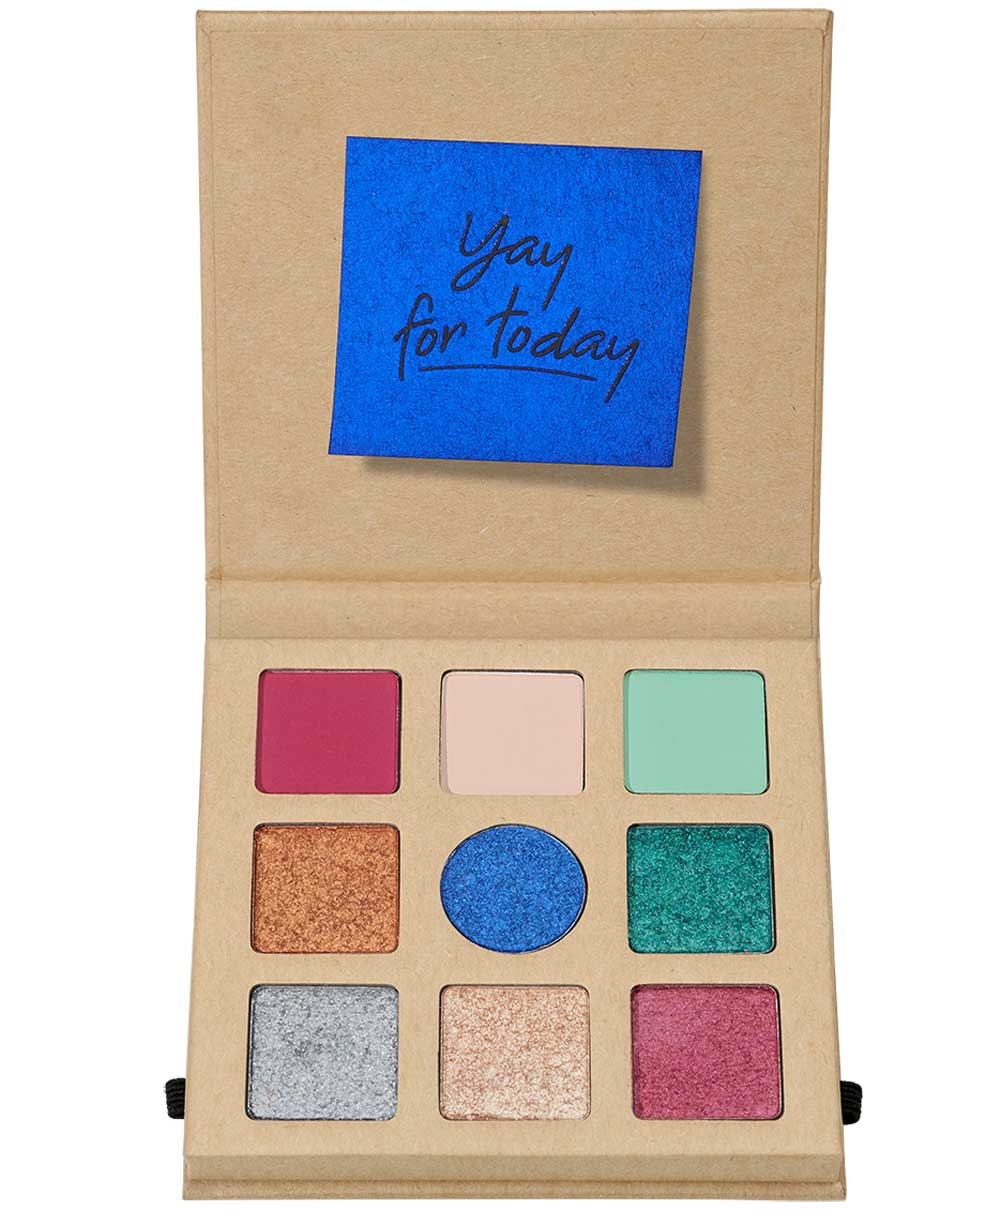 Essence Daily Dose Of Power palette